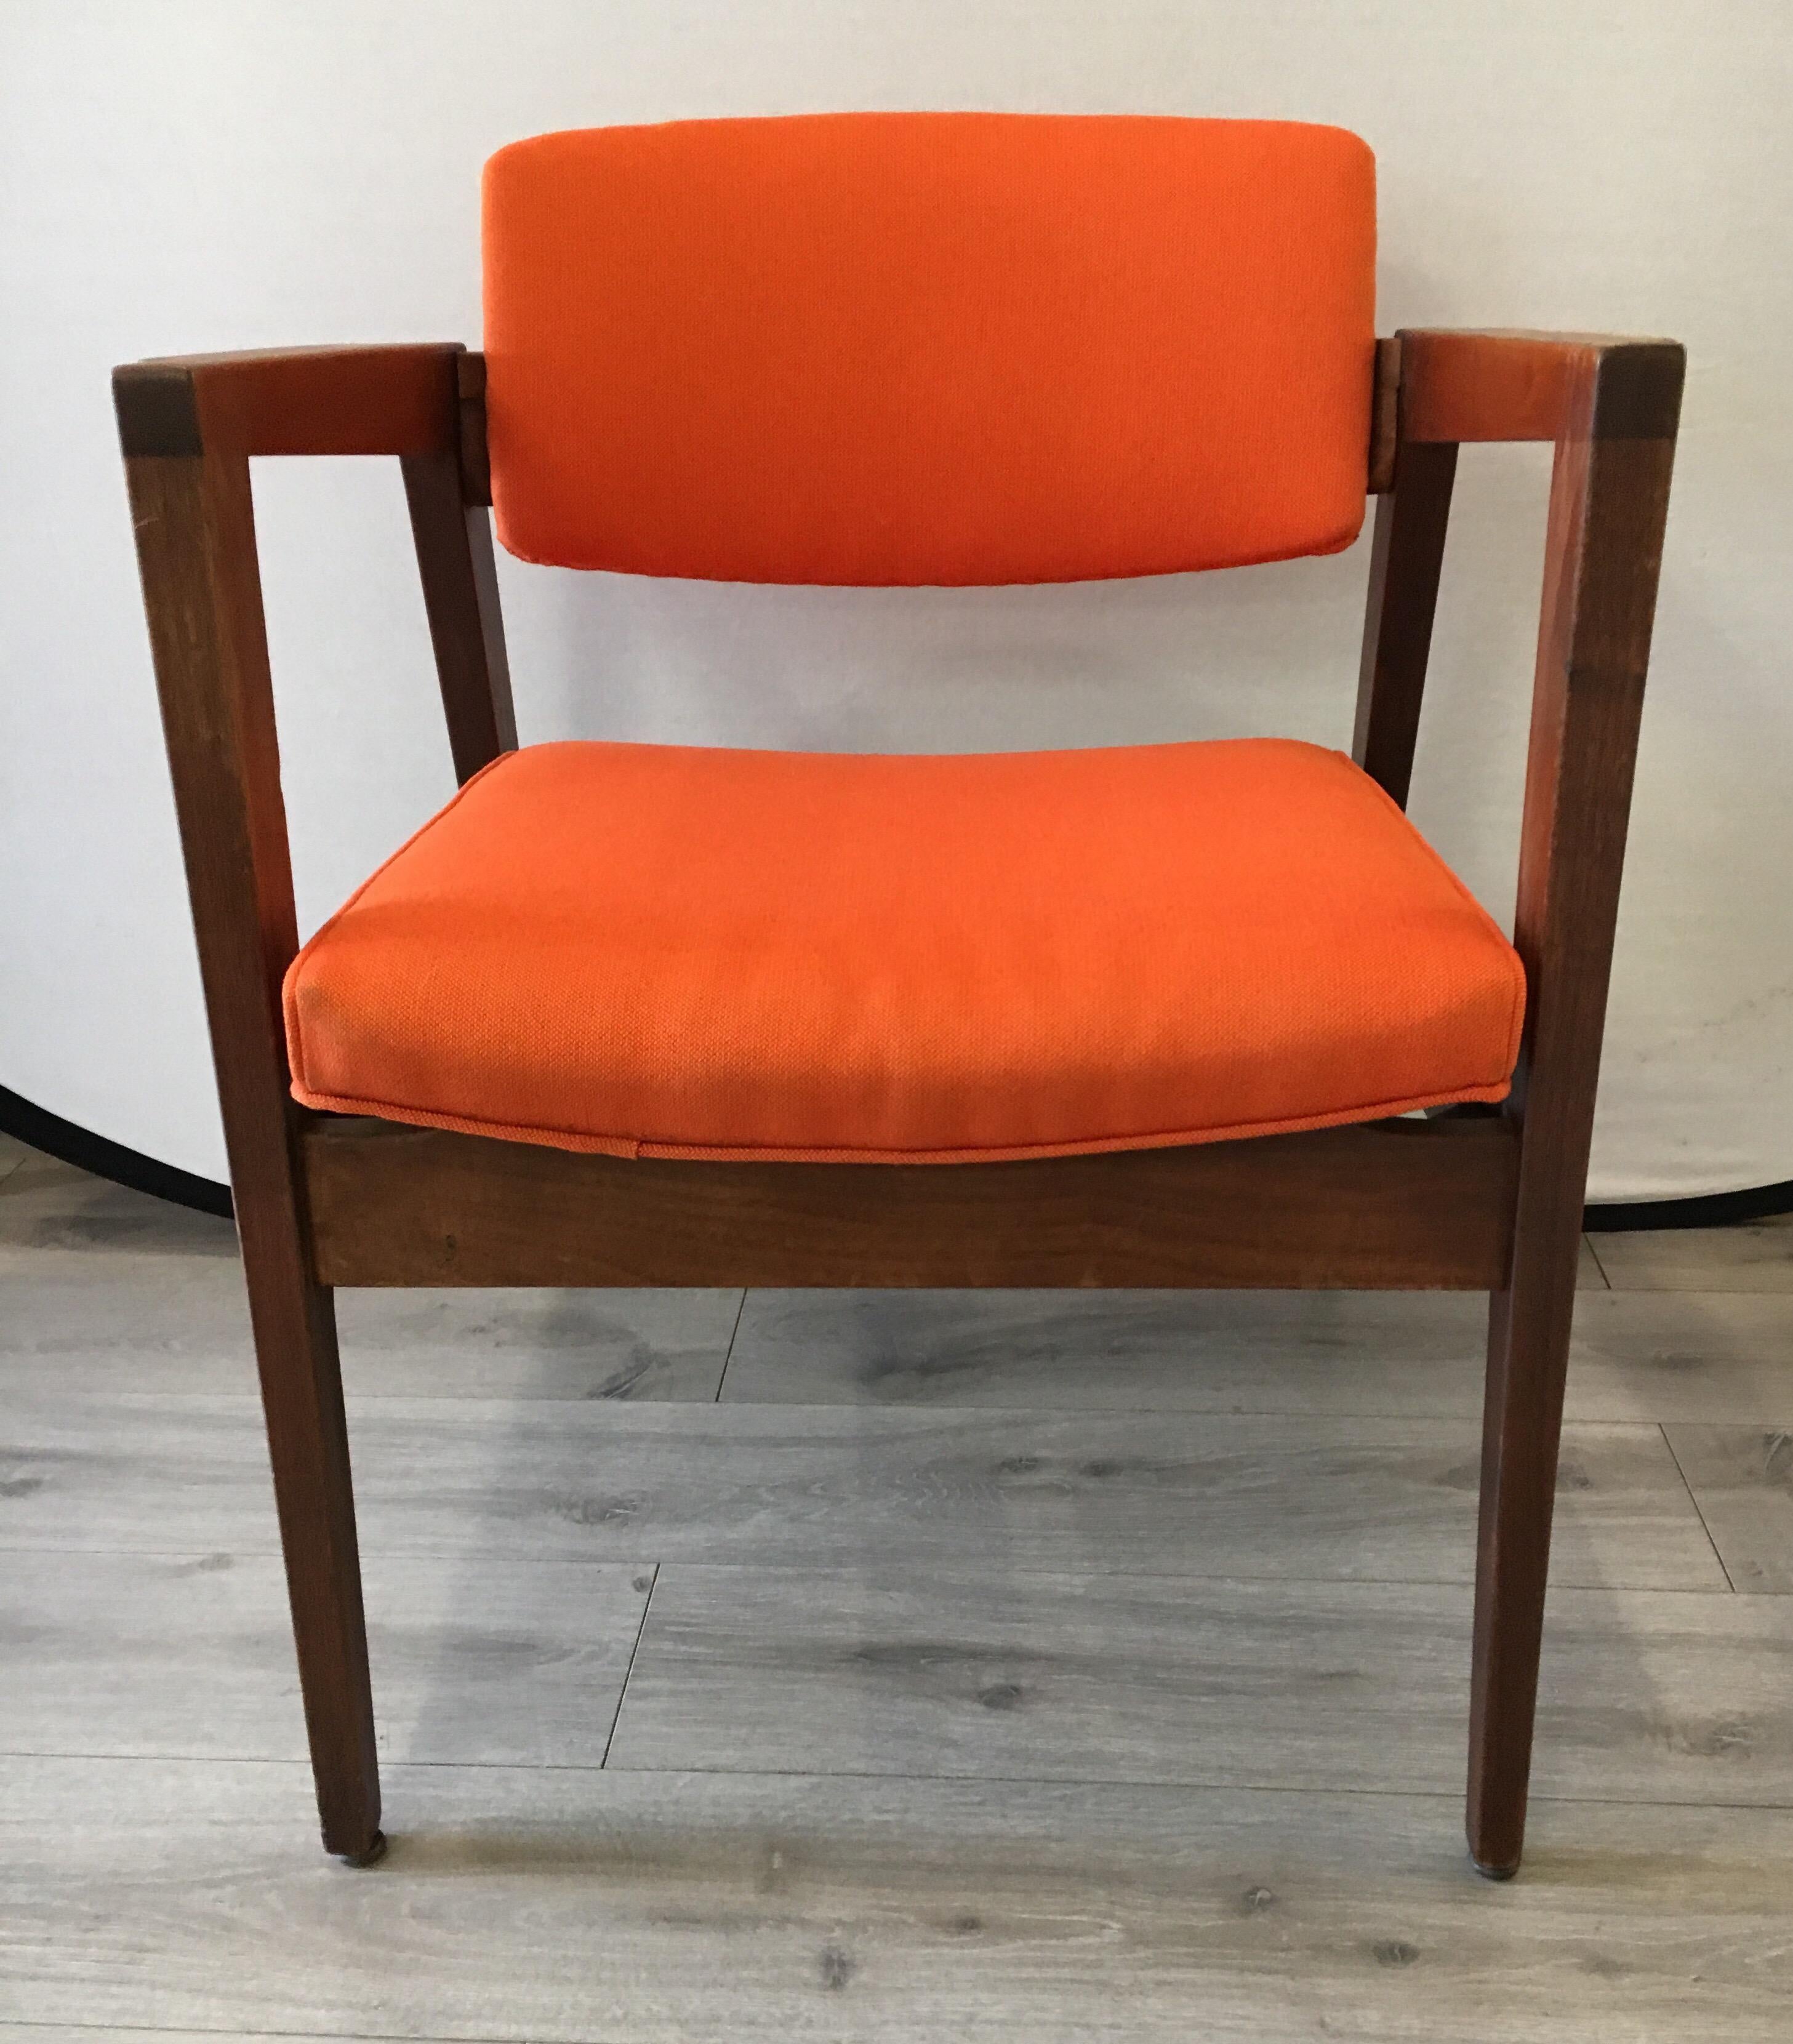 Danish modern walnut and teak lounge chair with newer Hermes orange colored upholstery.
Made in NY in the 1960s.